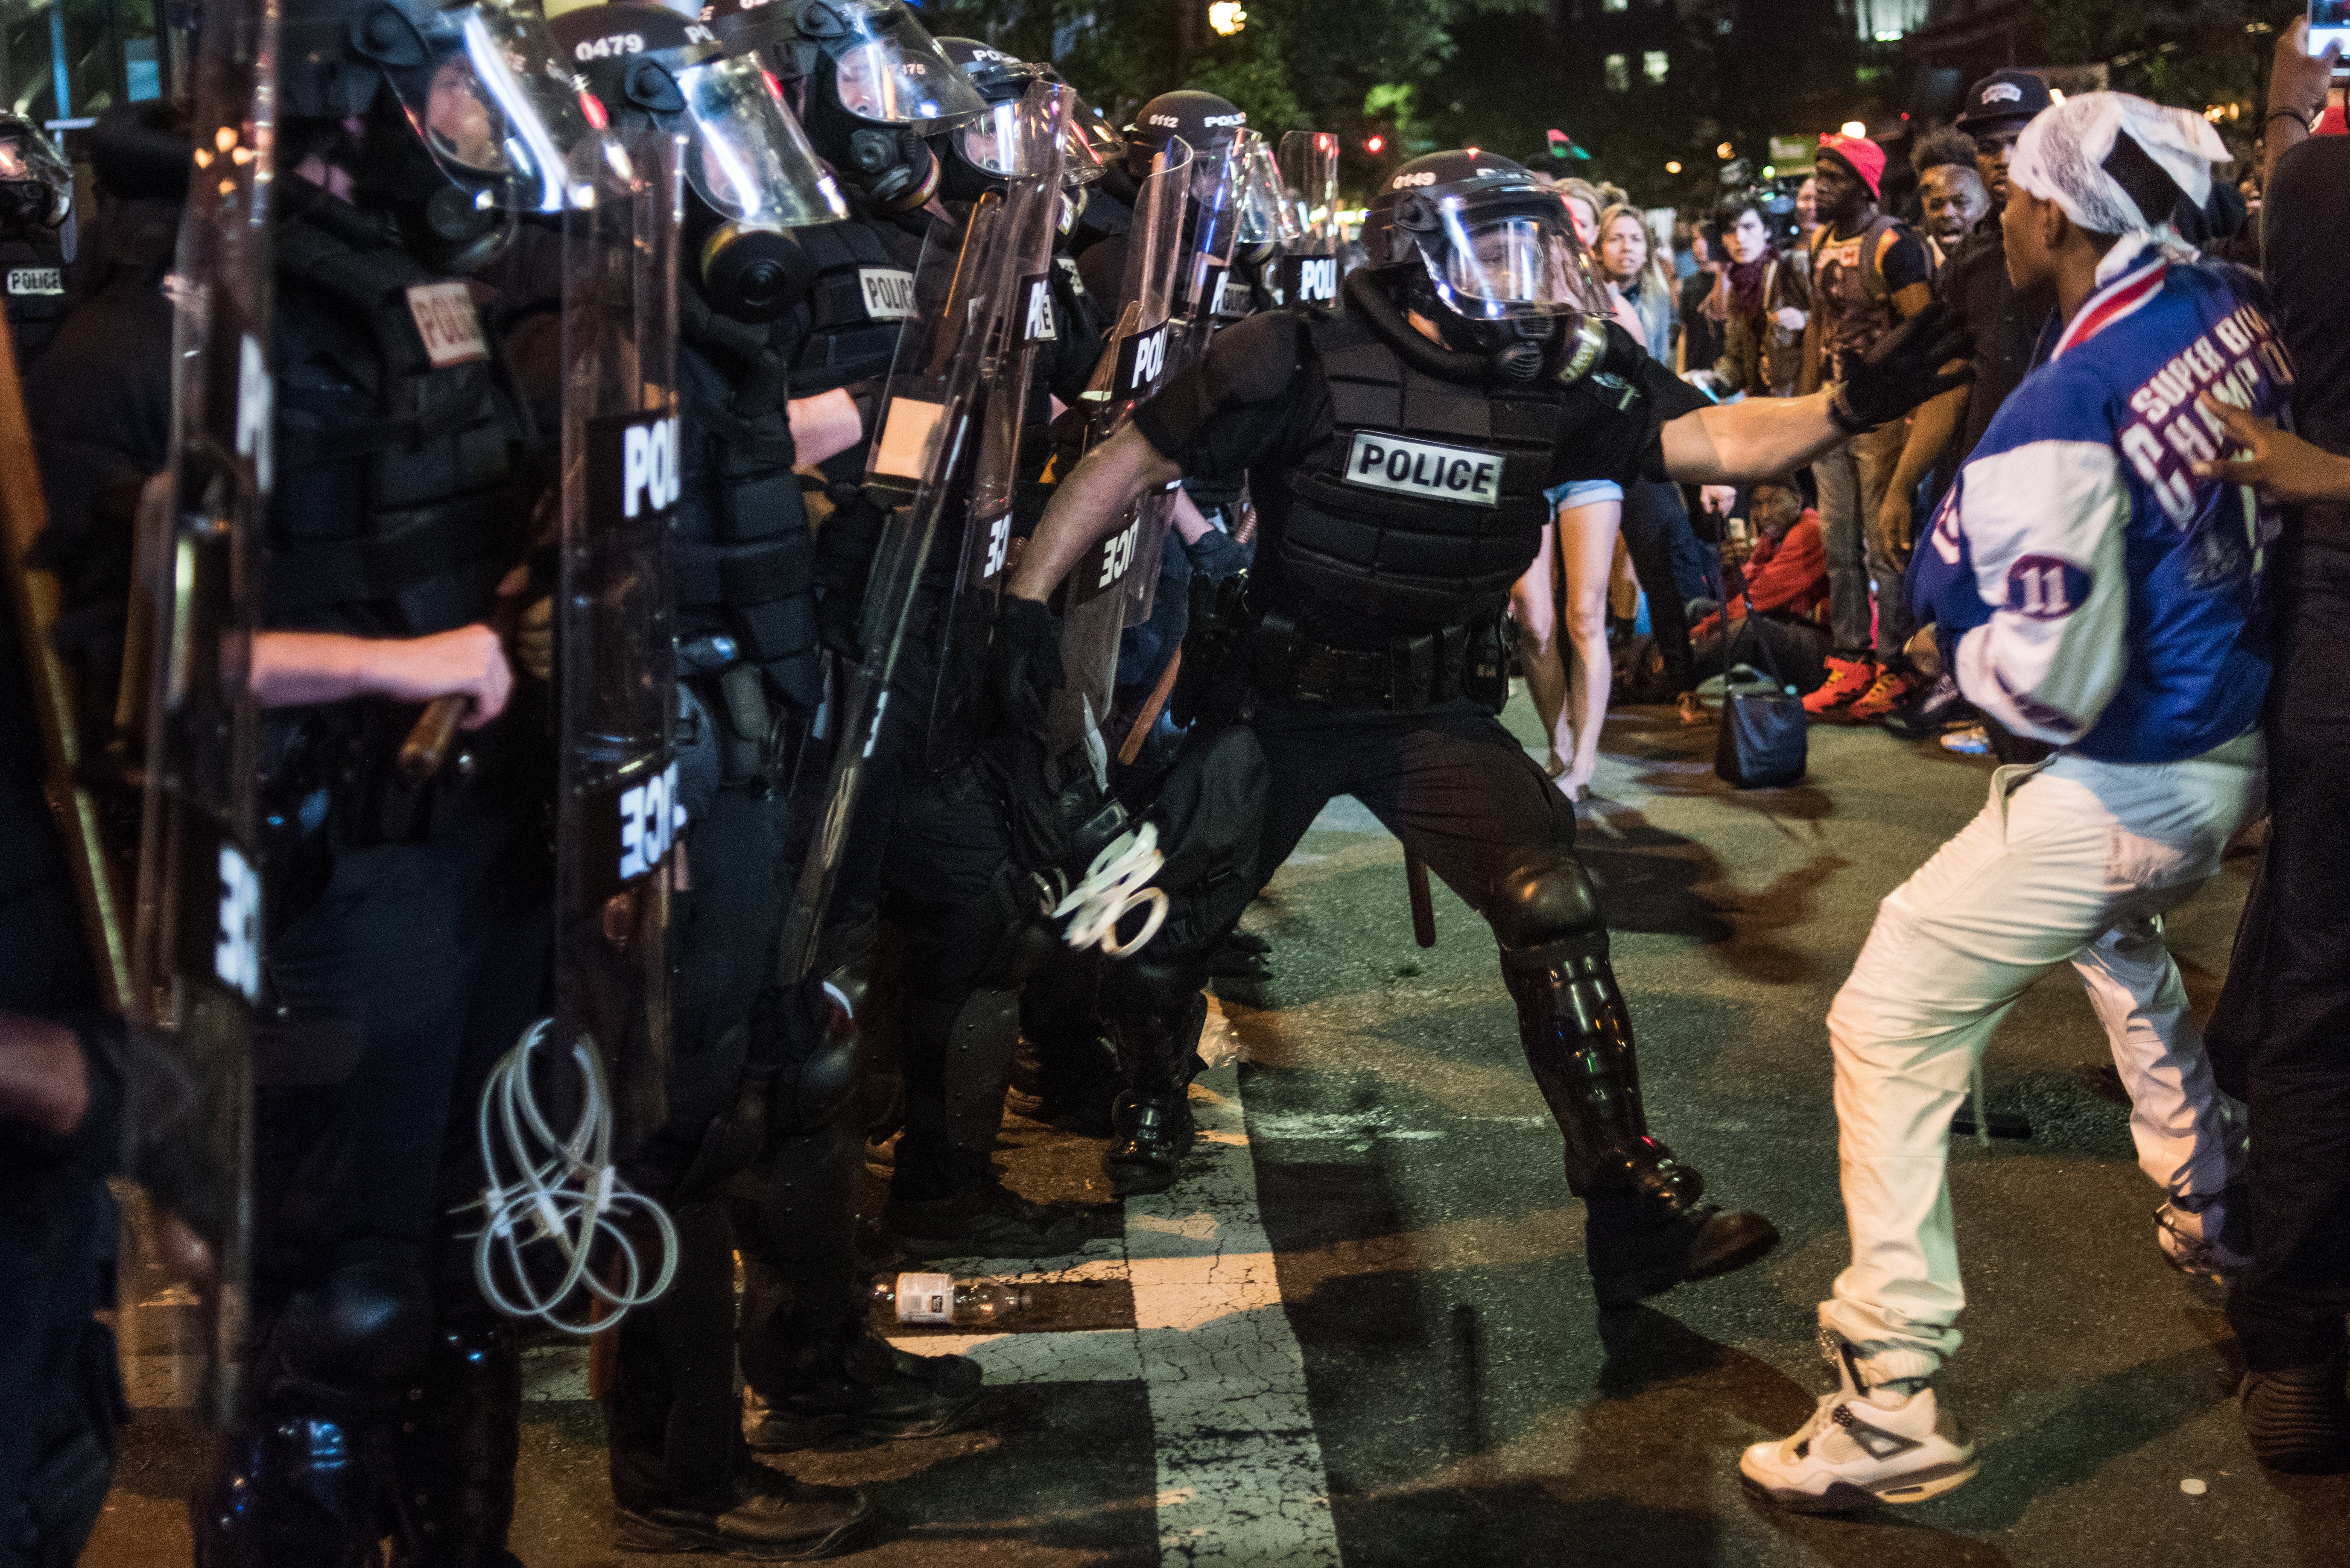 44 Harrowing Photos That Show The Pain & Hope Of The Charlotte Protests
